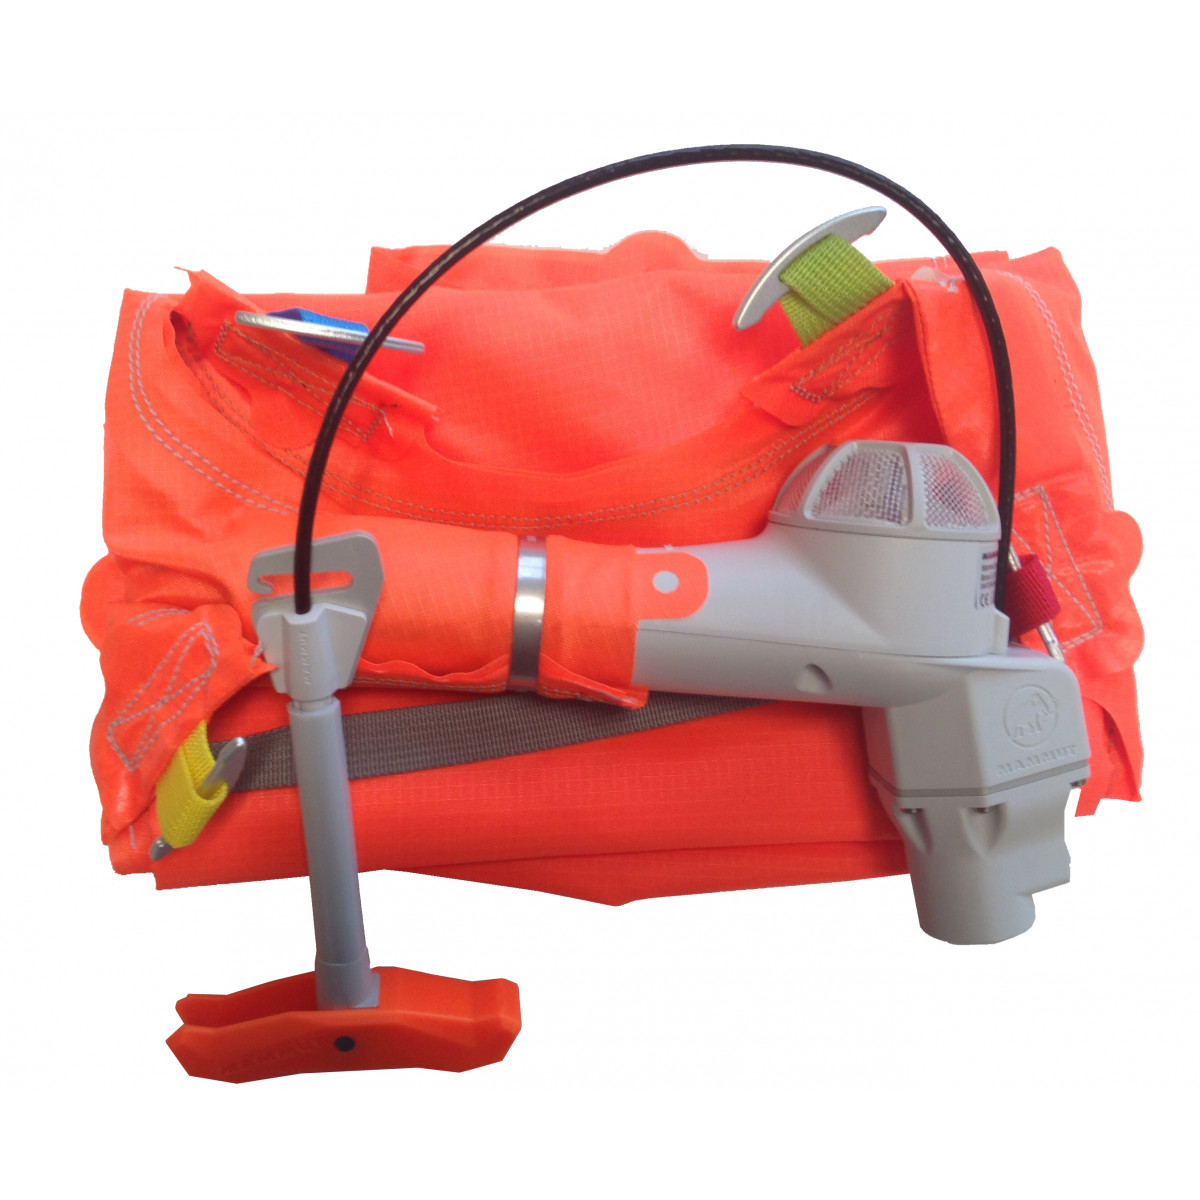 Mammut PROTECTION AIRBAG SYSTEM (P.A.S.)